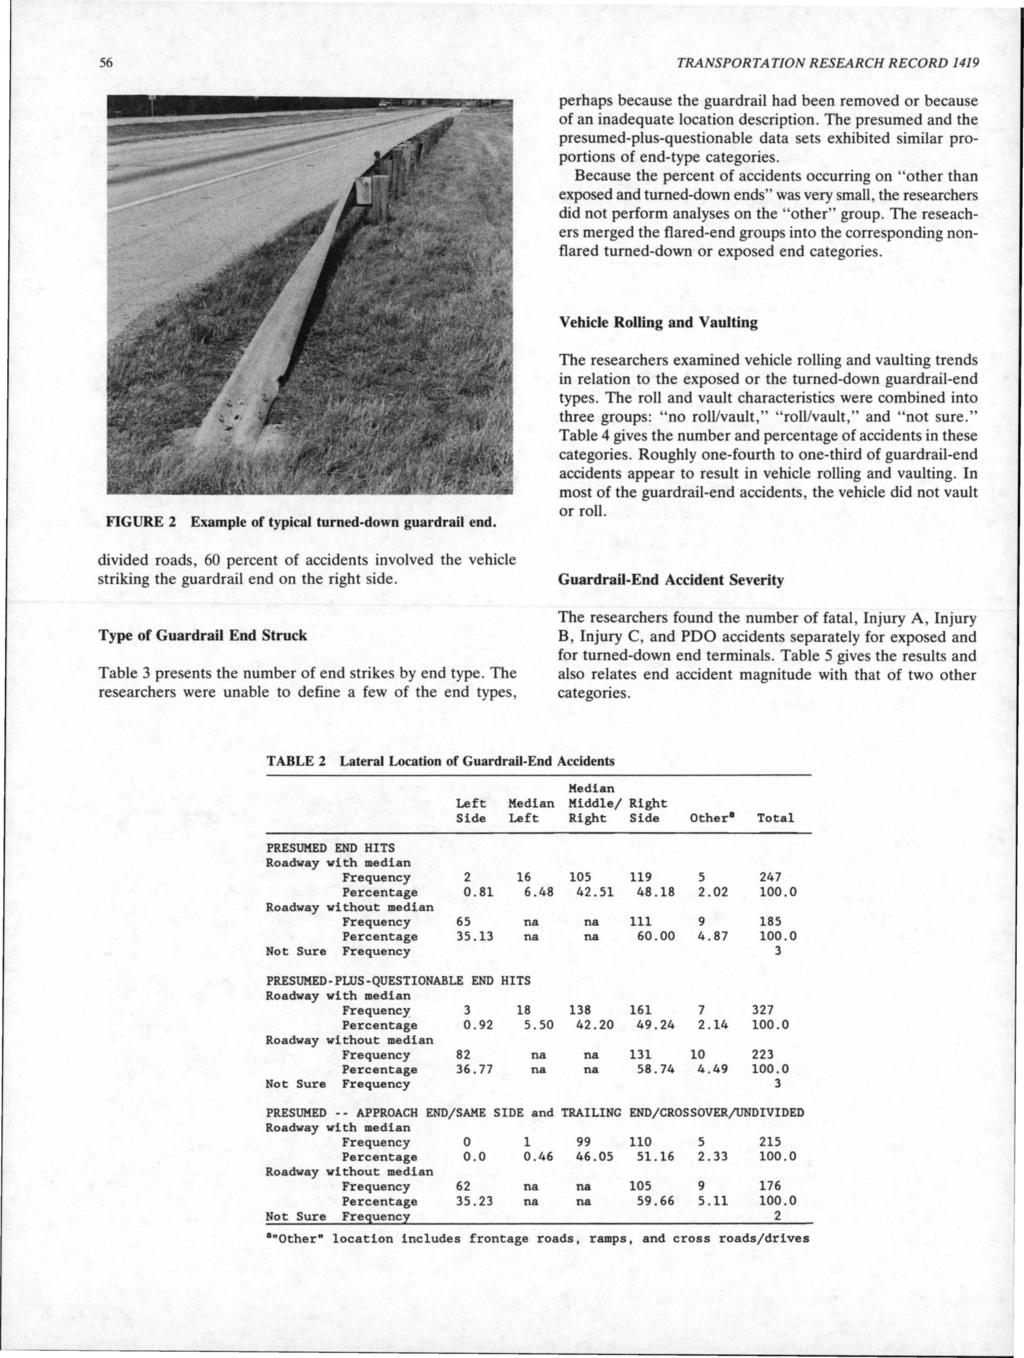 56 TRANSPORTATION RESEARCH RECORD 1419 perhaps because the guardrail had been removed or because of an inadequate location description.